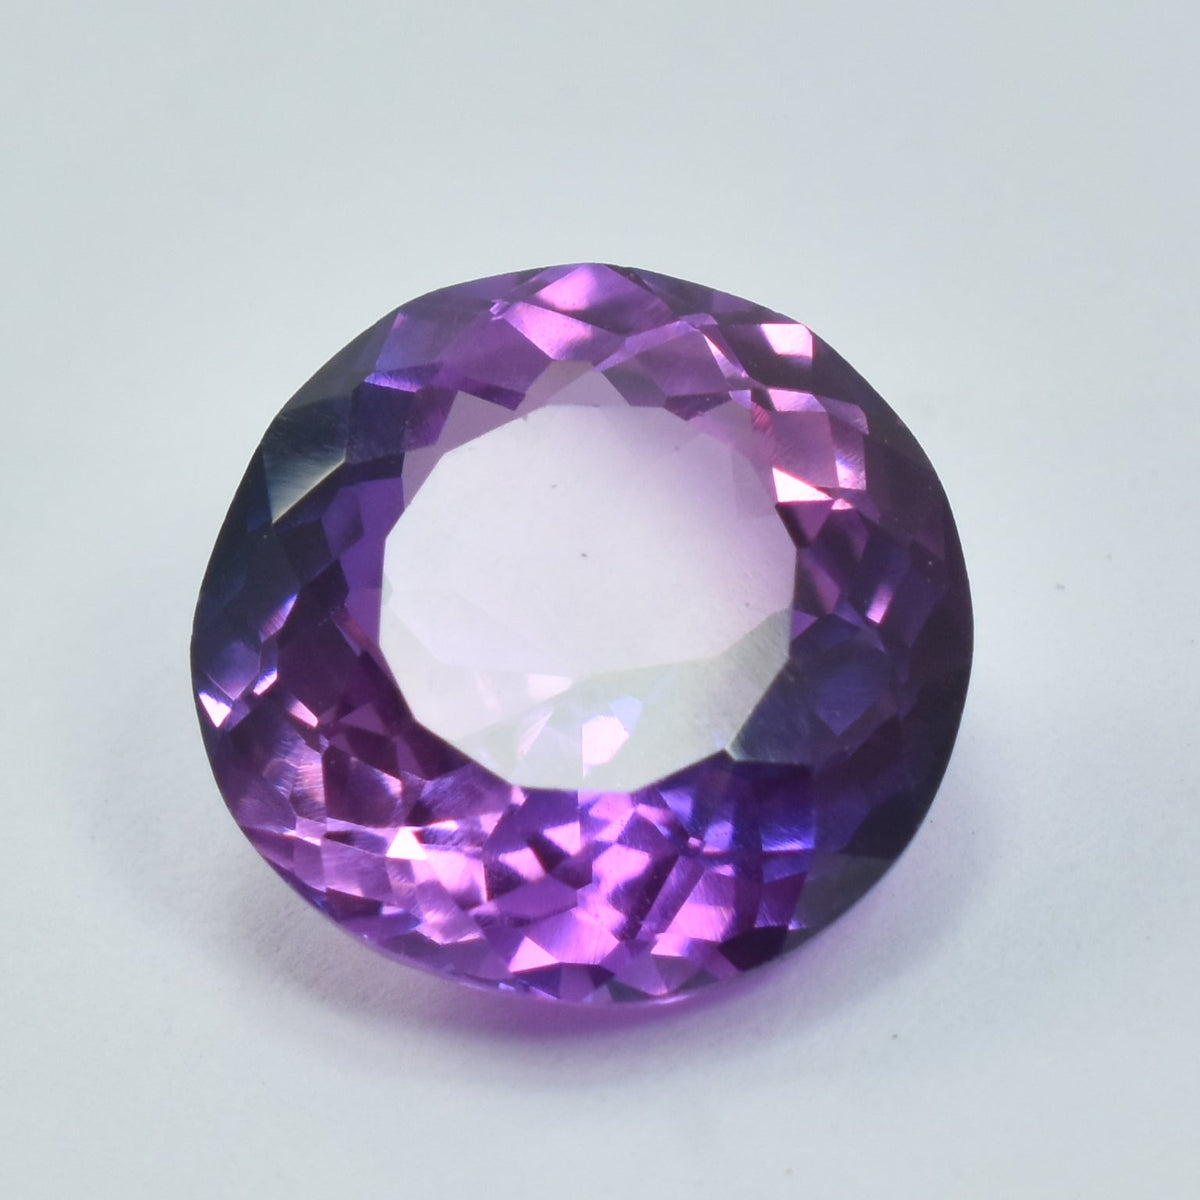 Round Cut Sapphire 10.52 Ct Glorious Color Change Top Quality Loose Gemstone Certified Natural Purple Sapphire ,Best For Exquisite Beauty & Symbolism , Wedding Gift